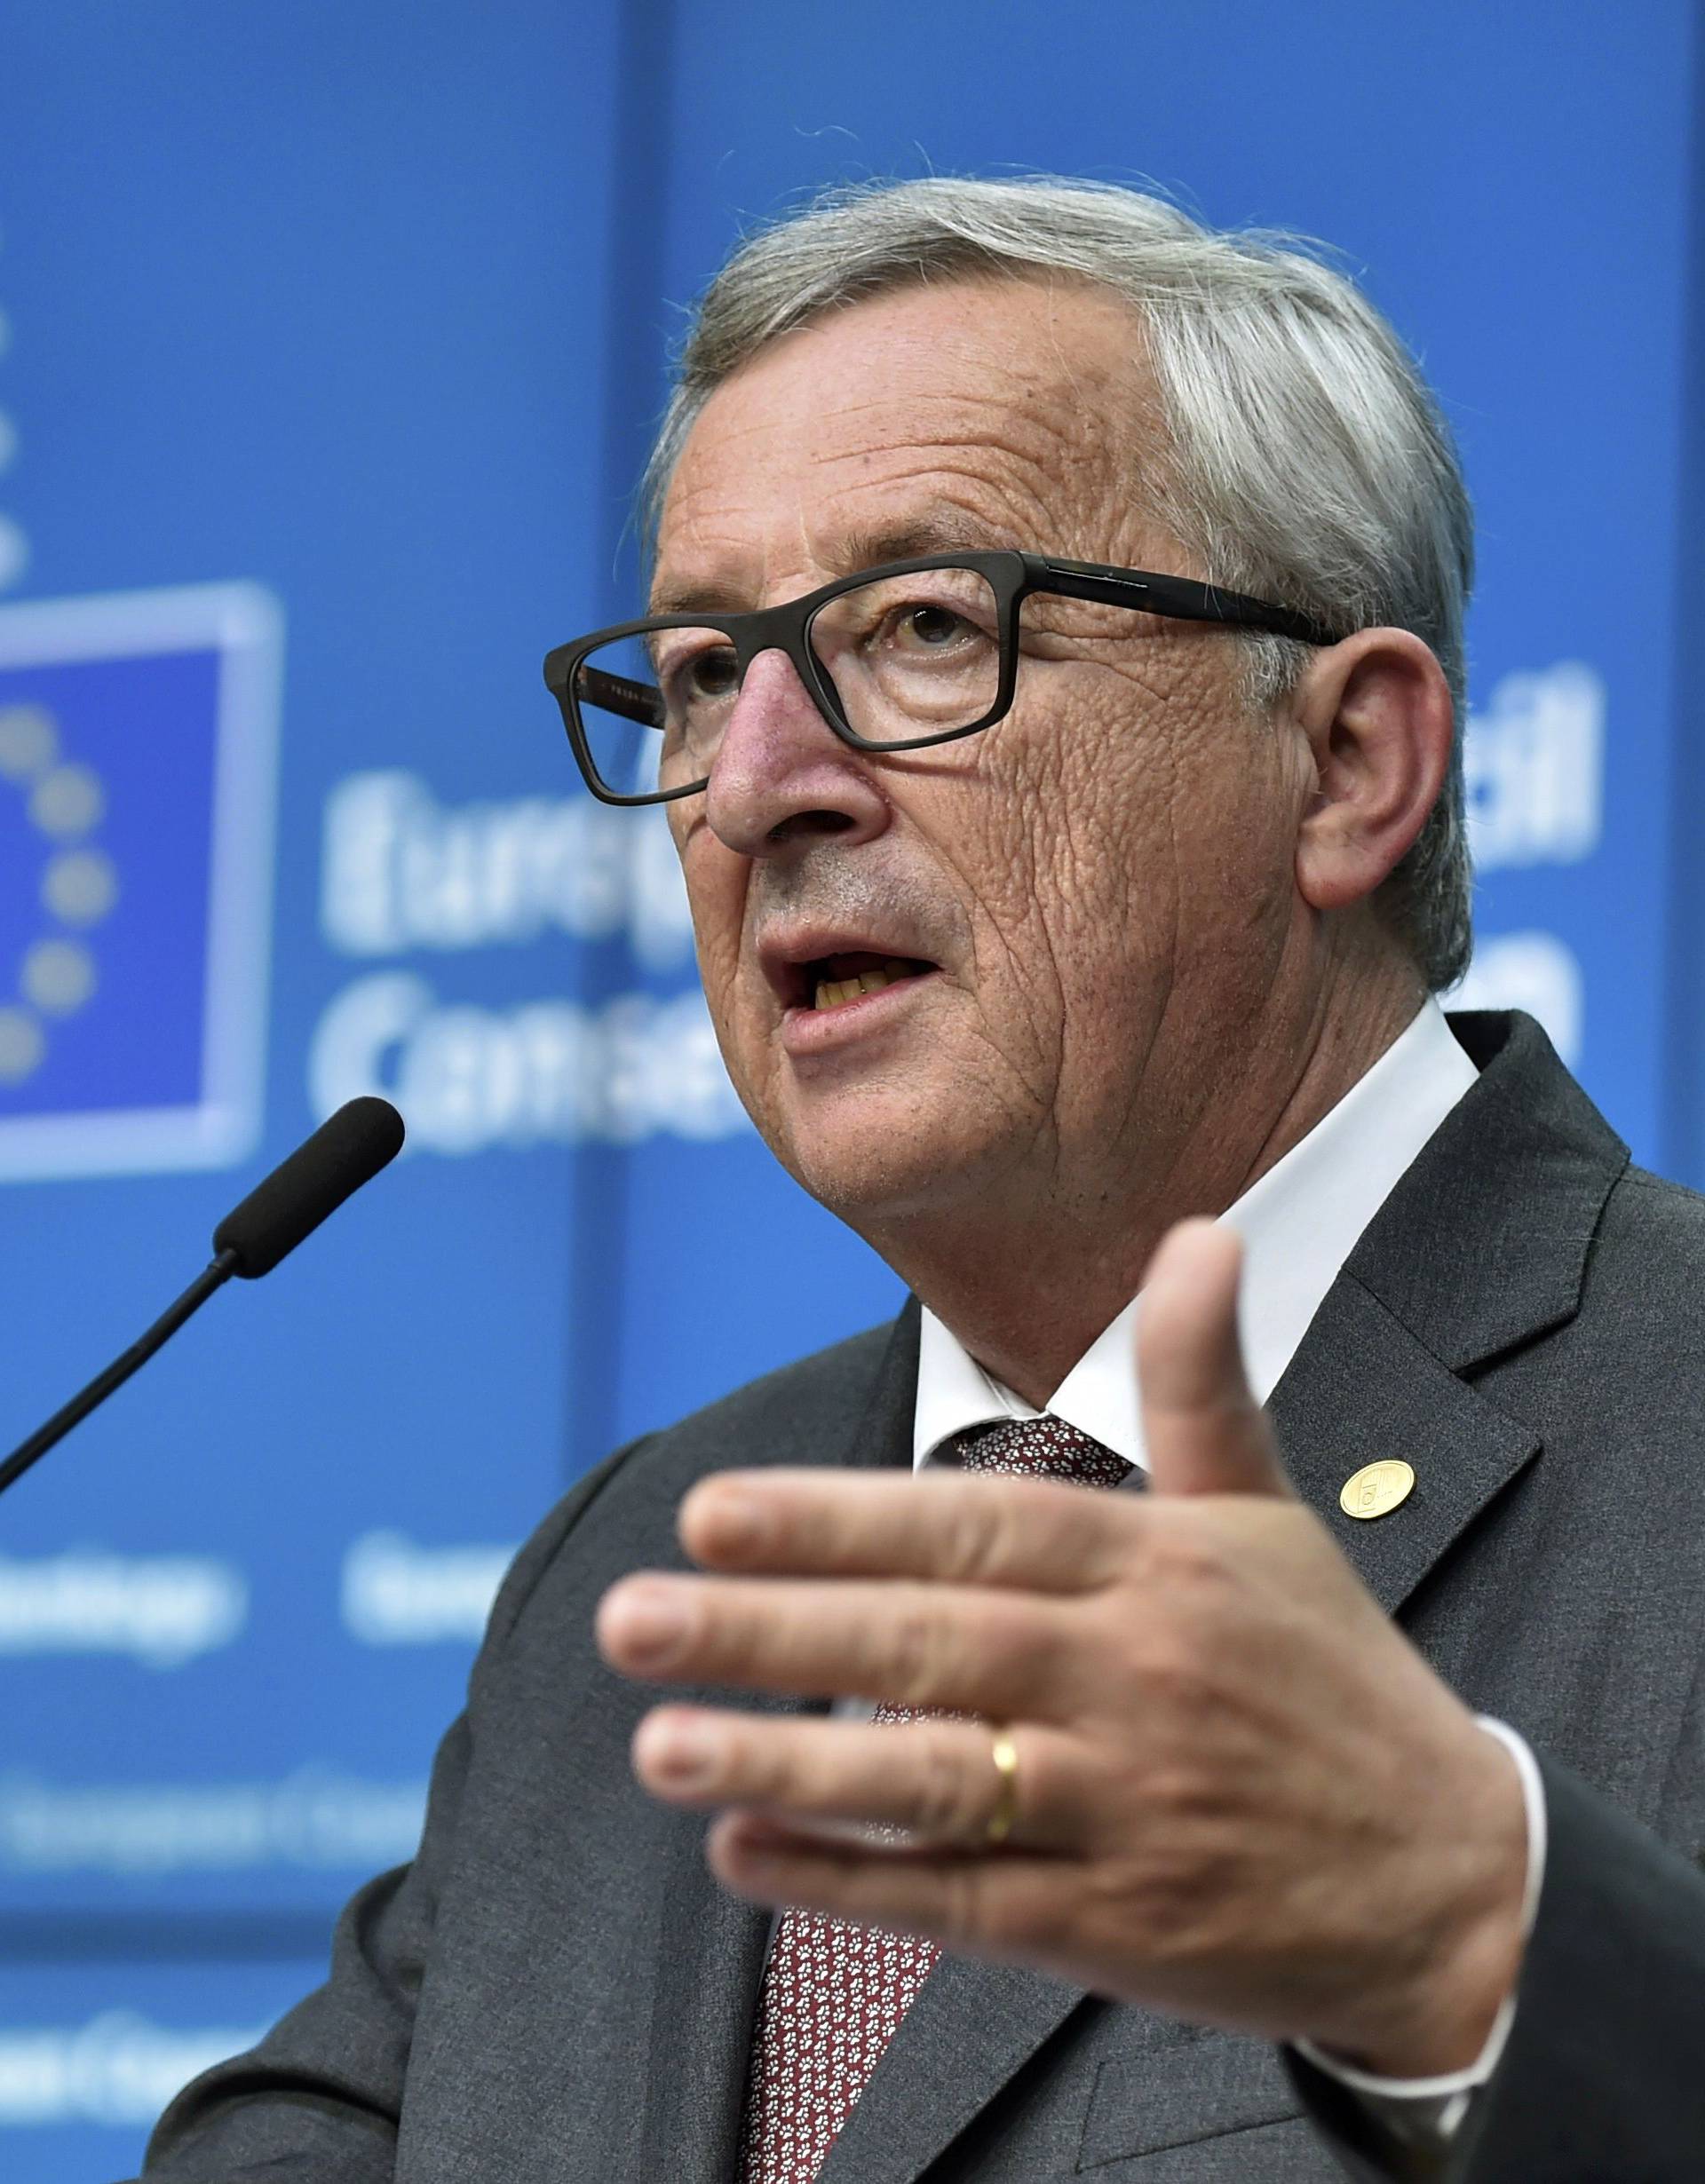 EU Commission President Juncker addresses a press conference after the EU Summit in Brussels